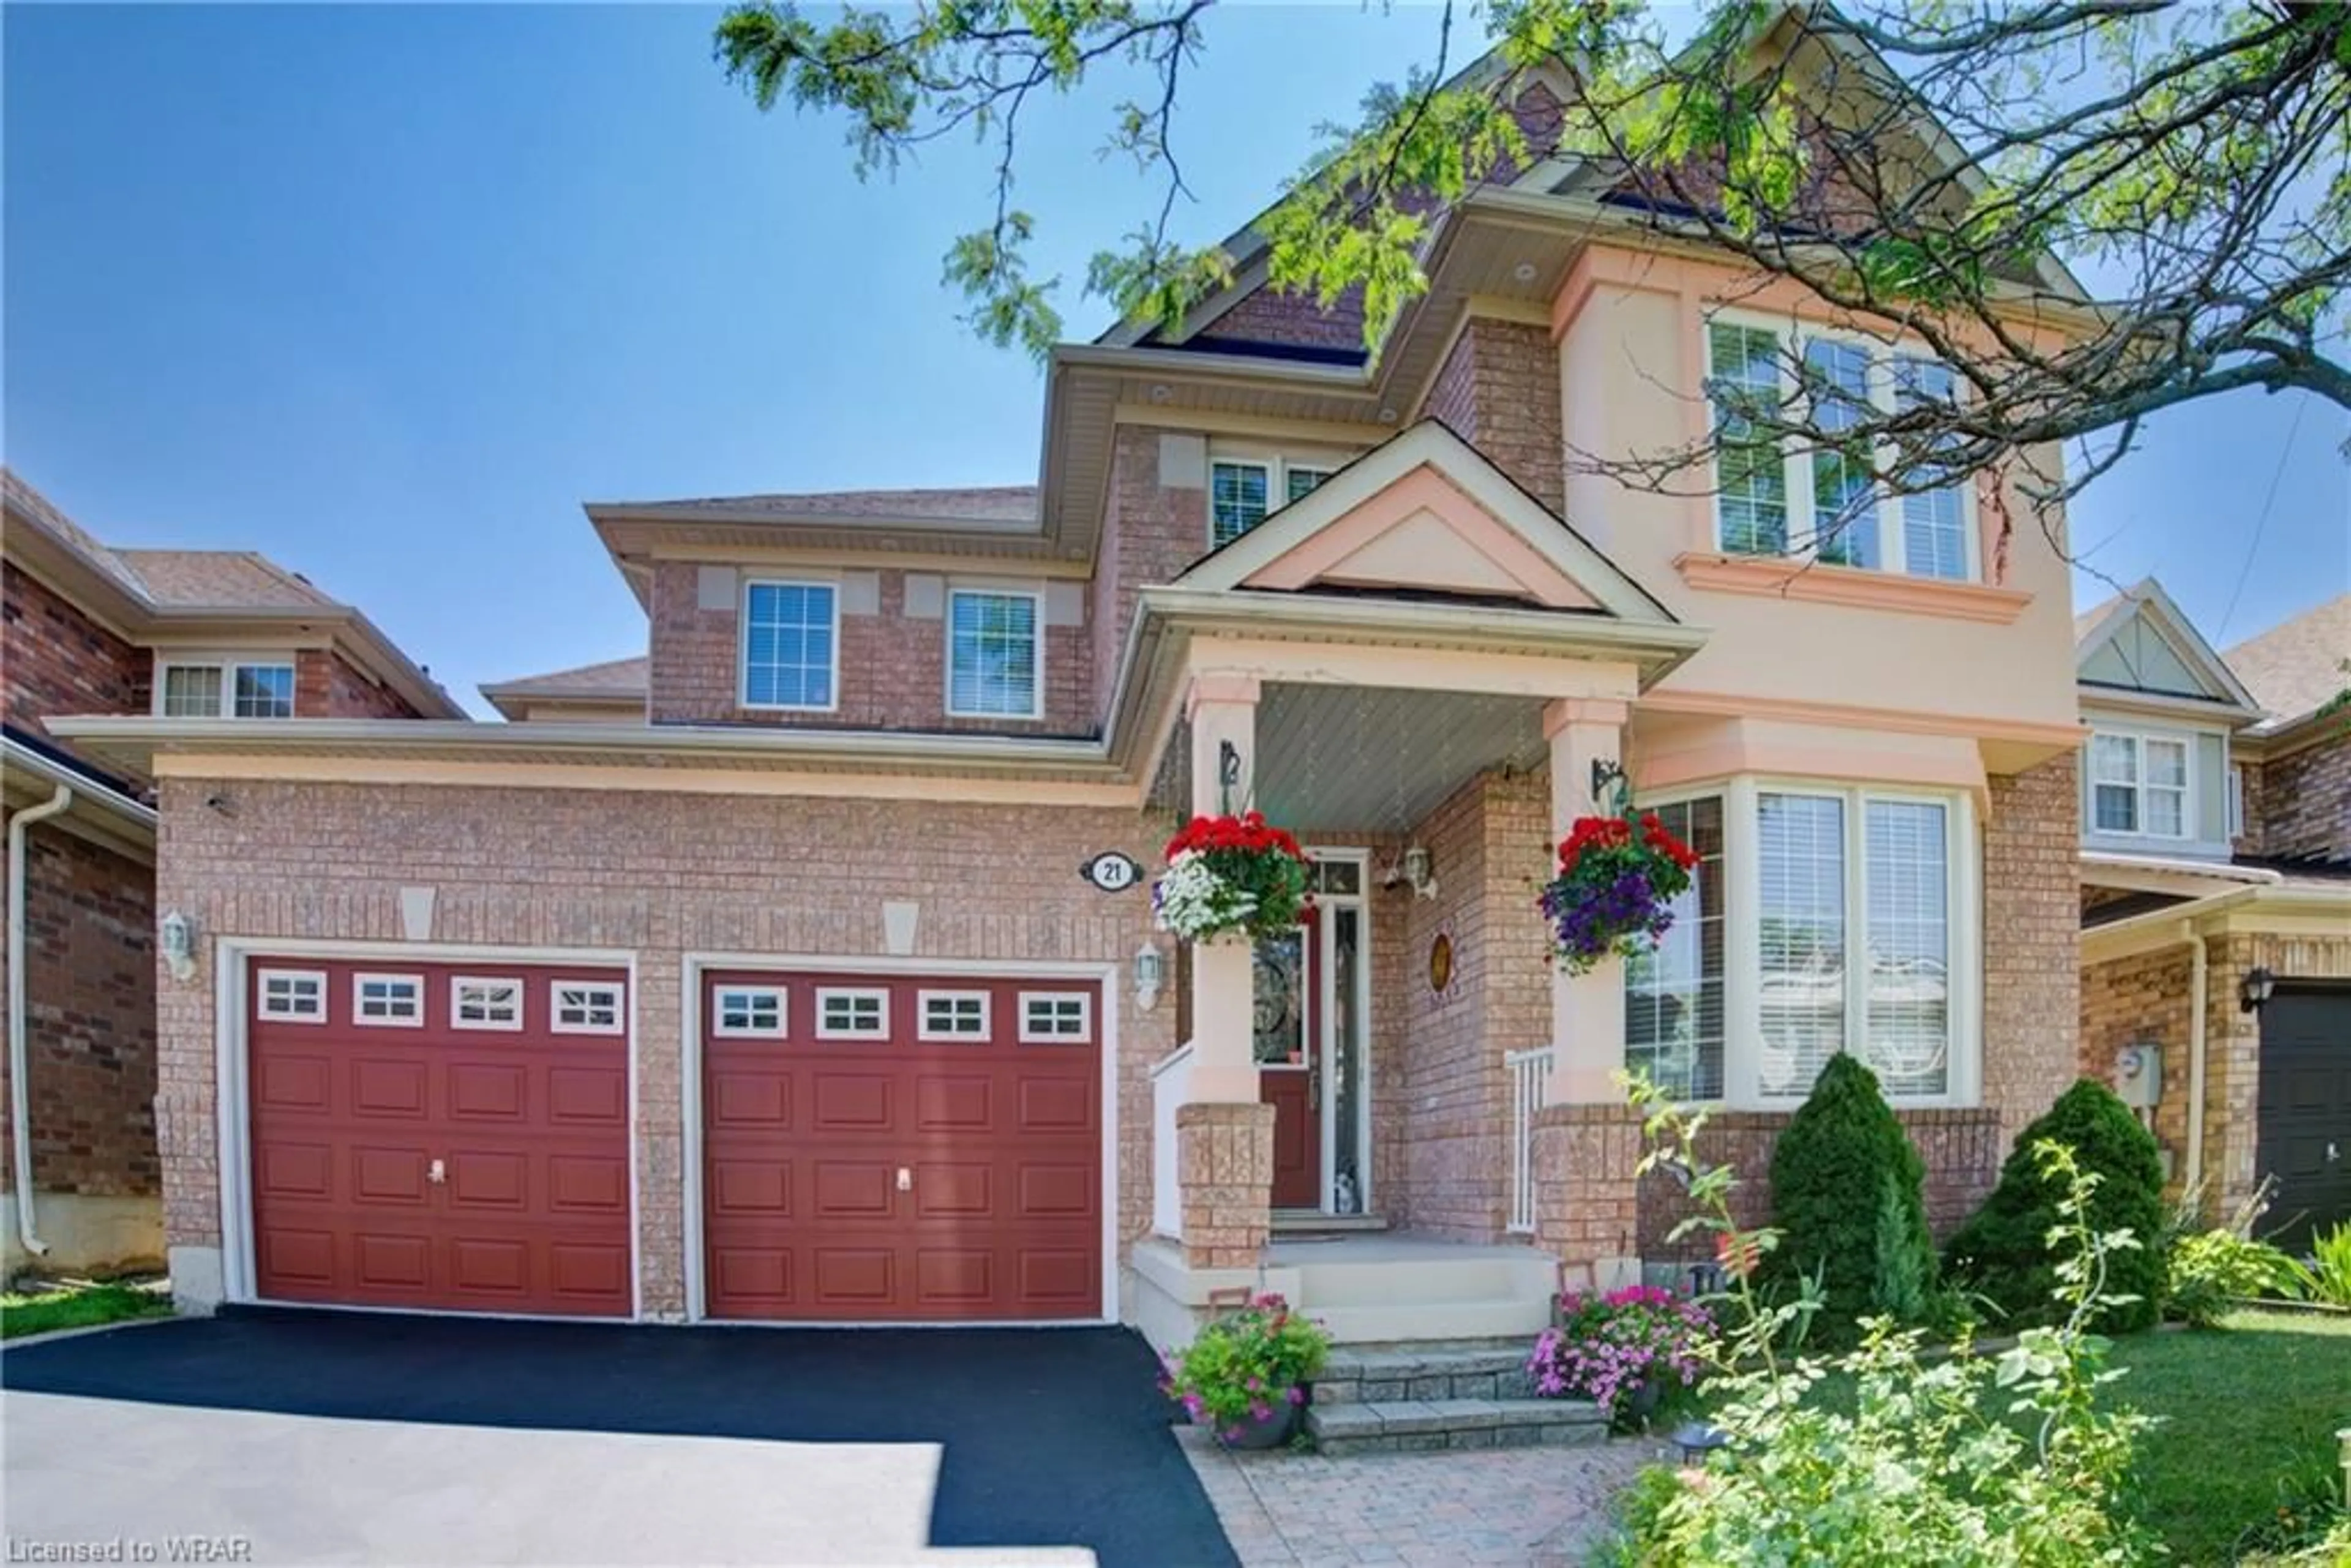 Home with brick exterior material for 21 Mistybrook Cres, Brampton Ontario L7A 2S8